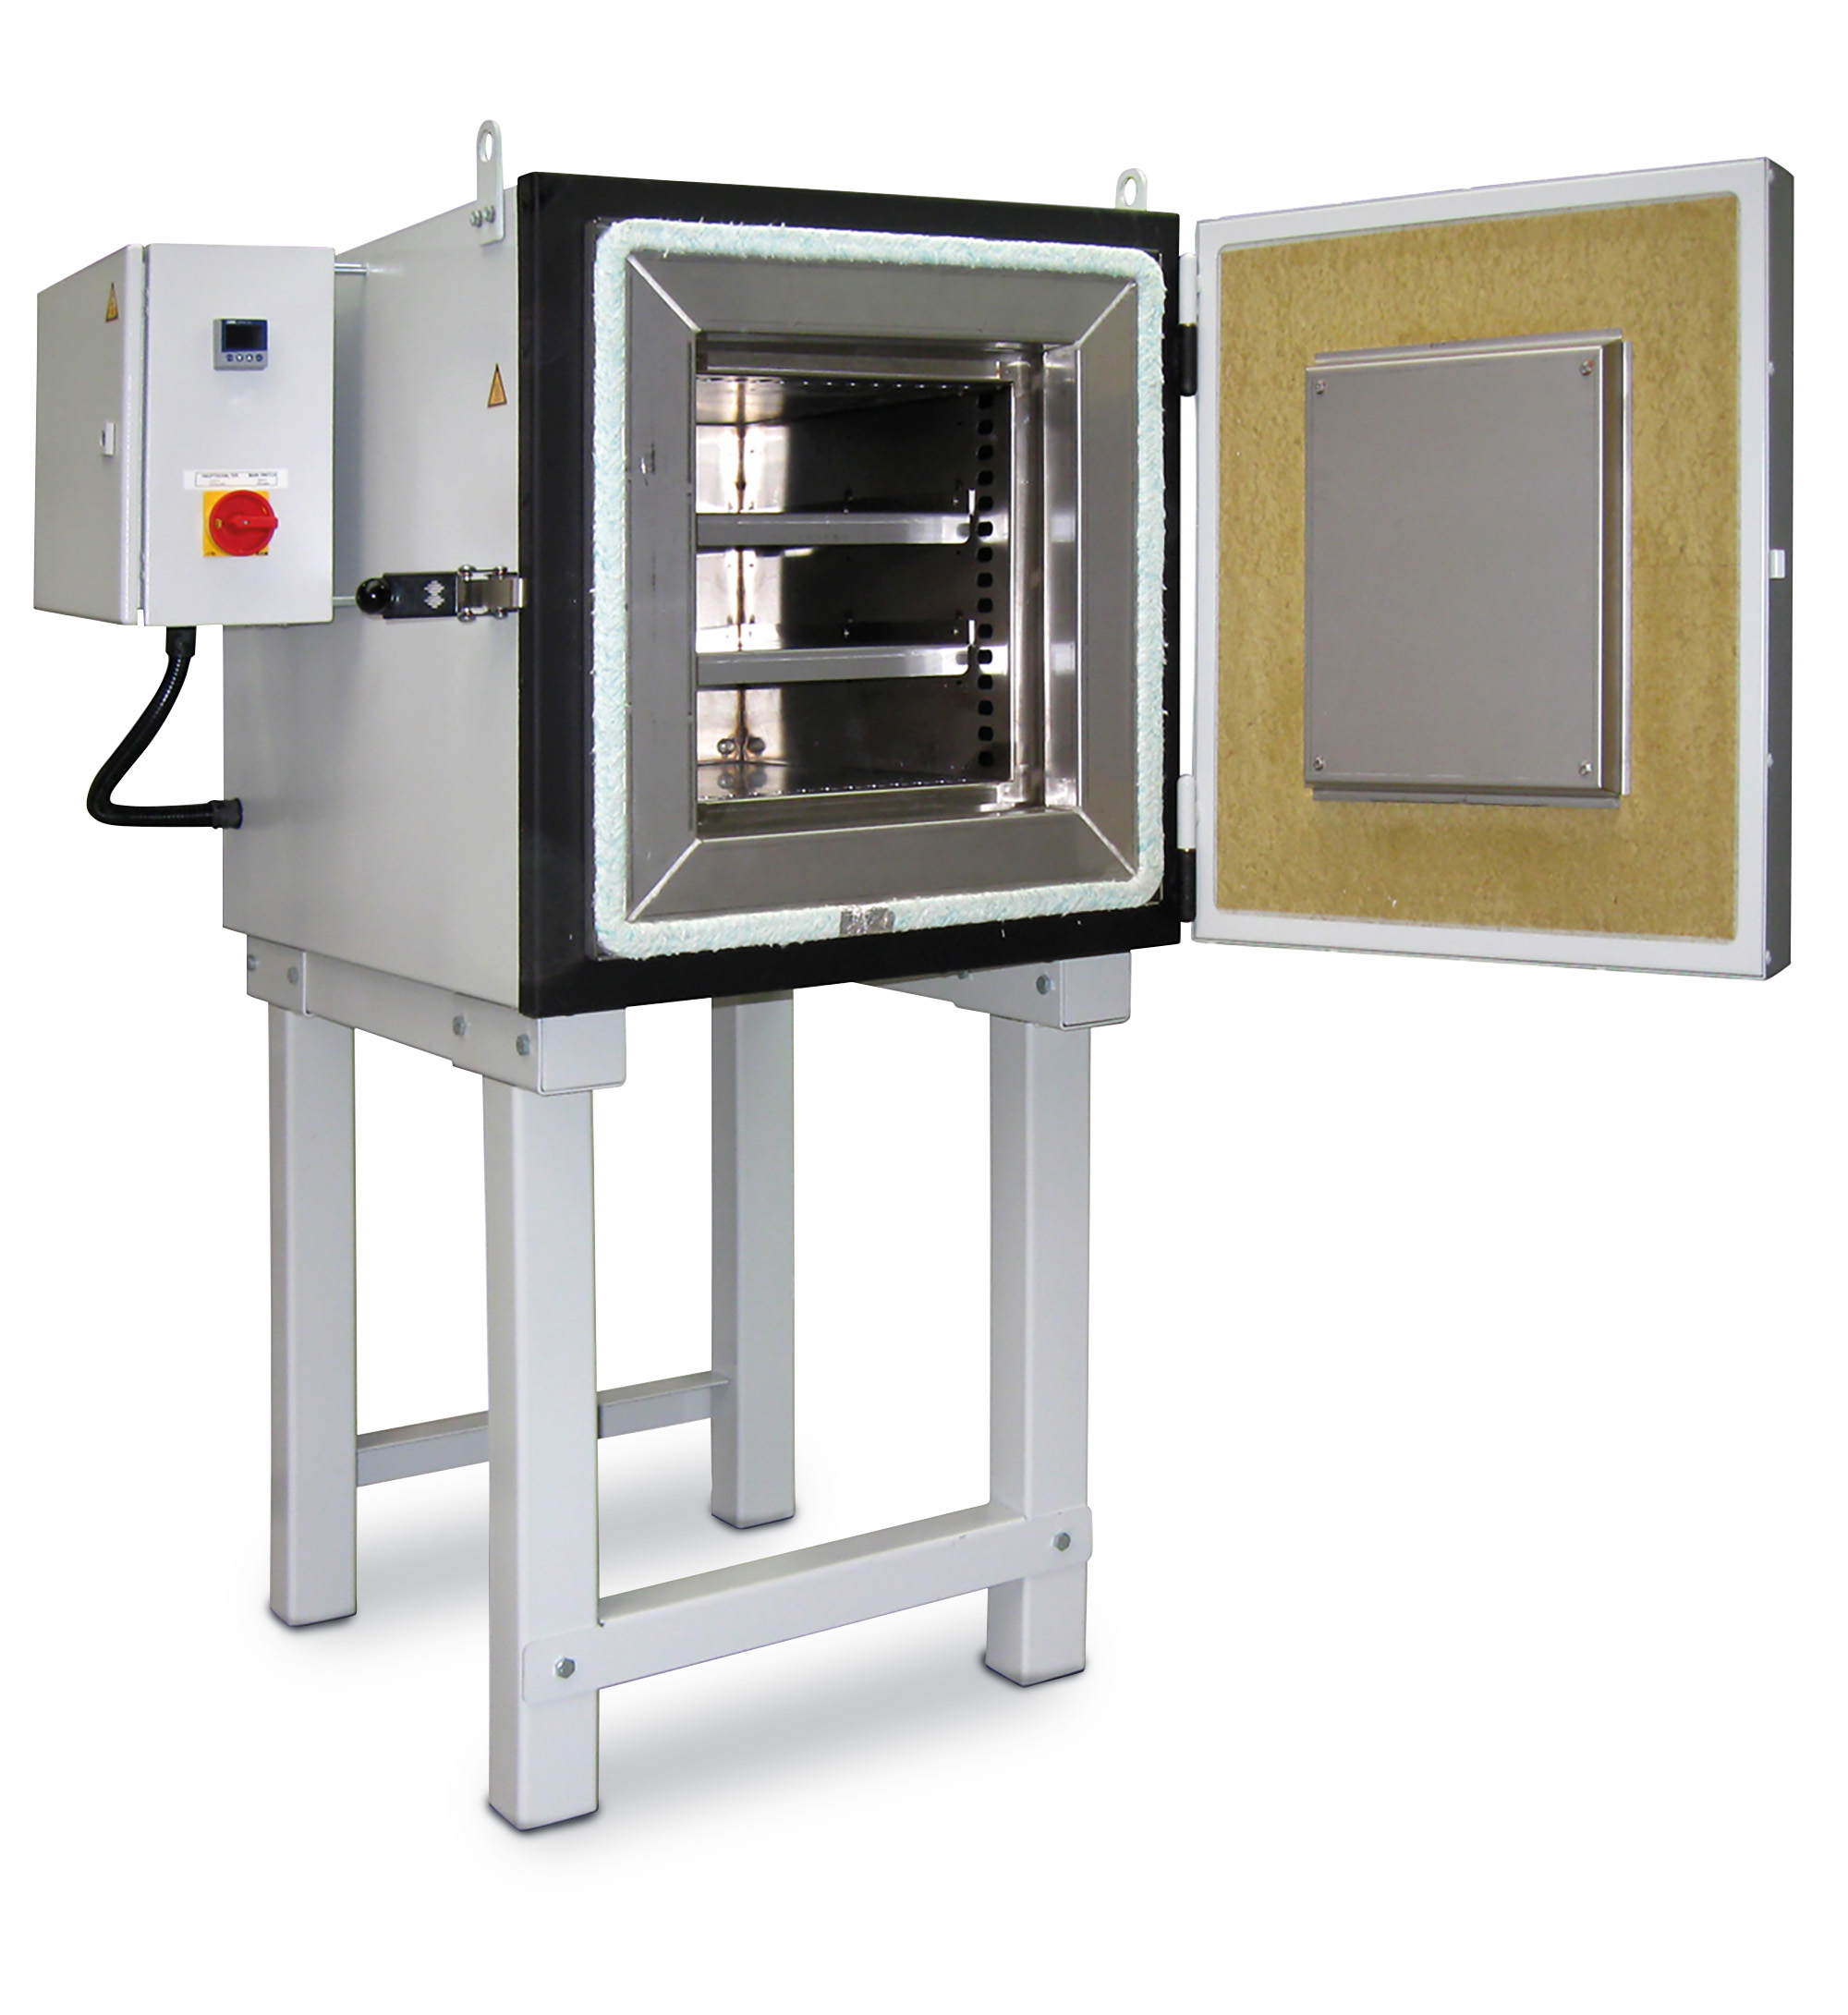 High-temperature drying ovens up to 850°C